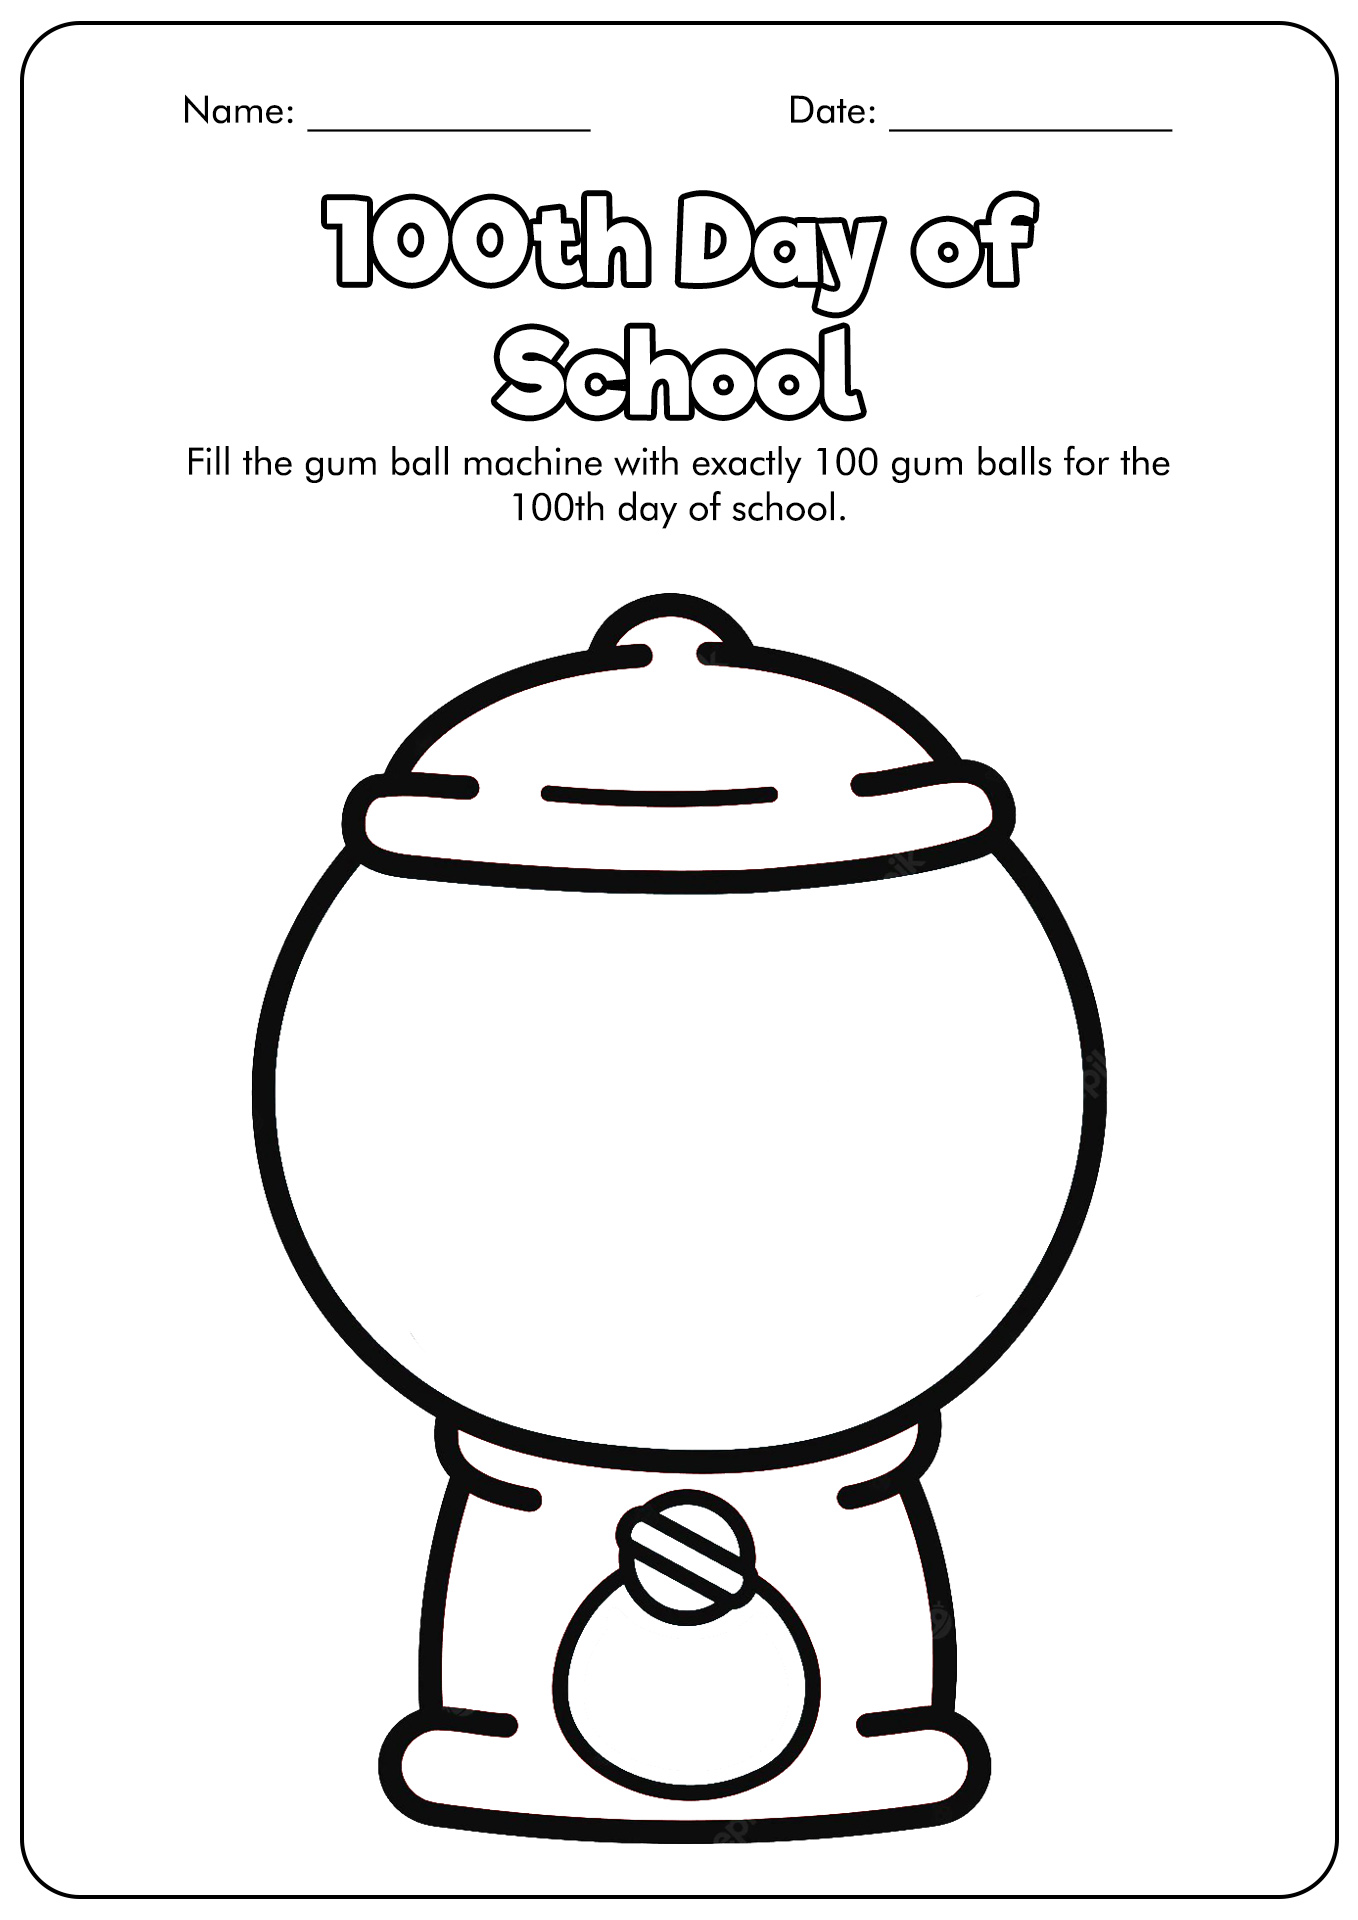 100 Days of School Gumball Machine Coloring Page Image